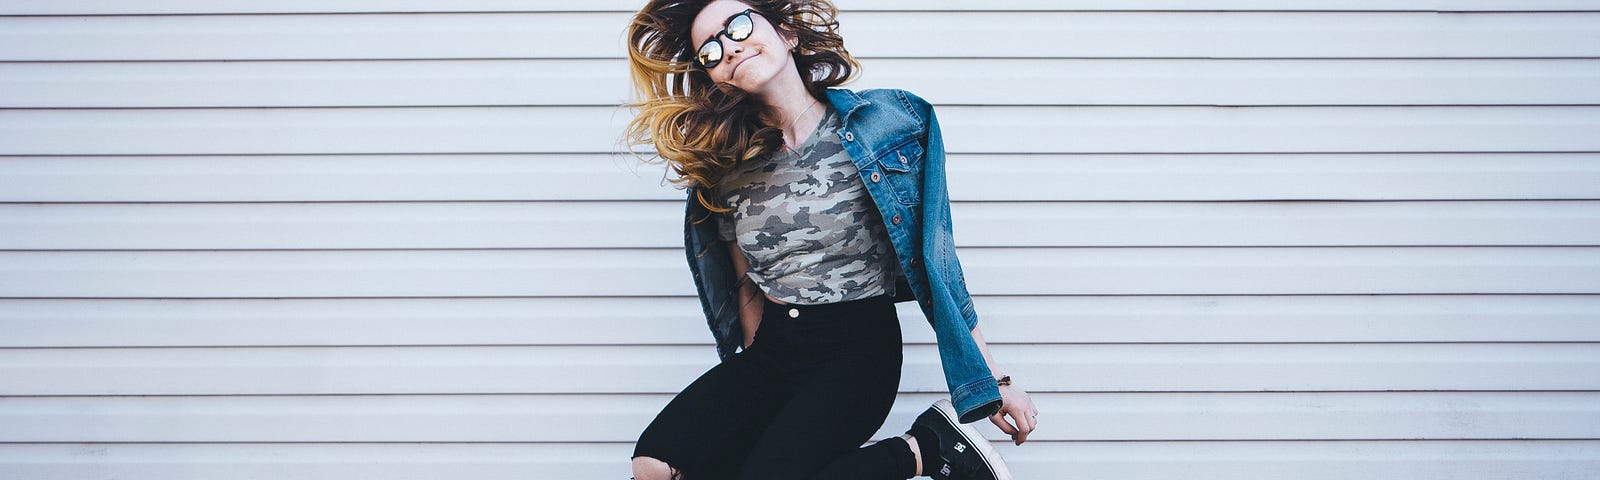 woman wearing black ripped jeans and a denim jacket jumping against a backdrop of a white wall.